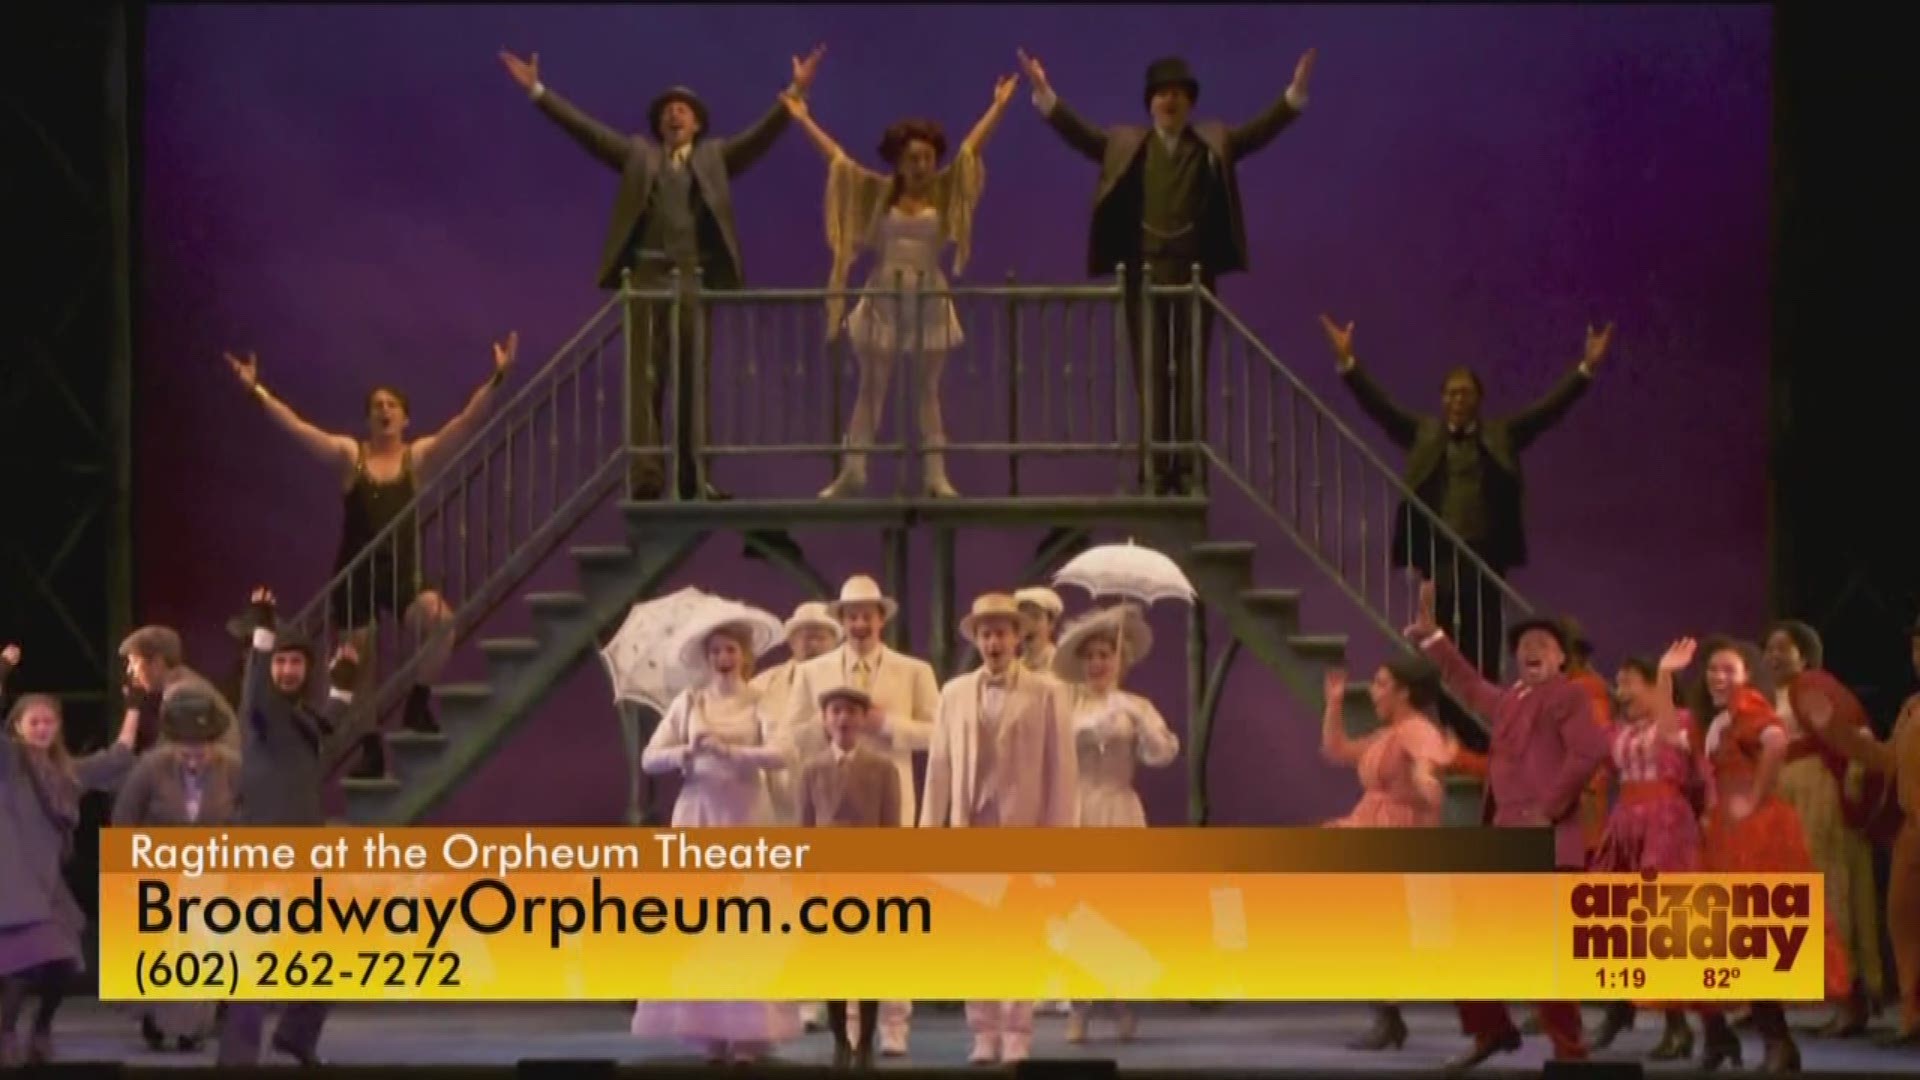 Meet one of the stars of Ragtime, and check the show out in Phoenix this weekend.